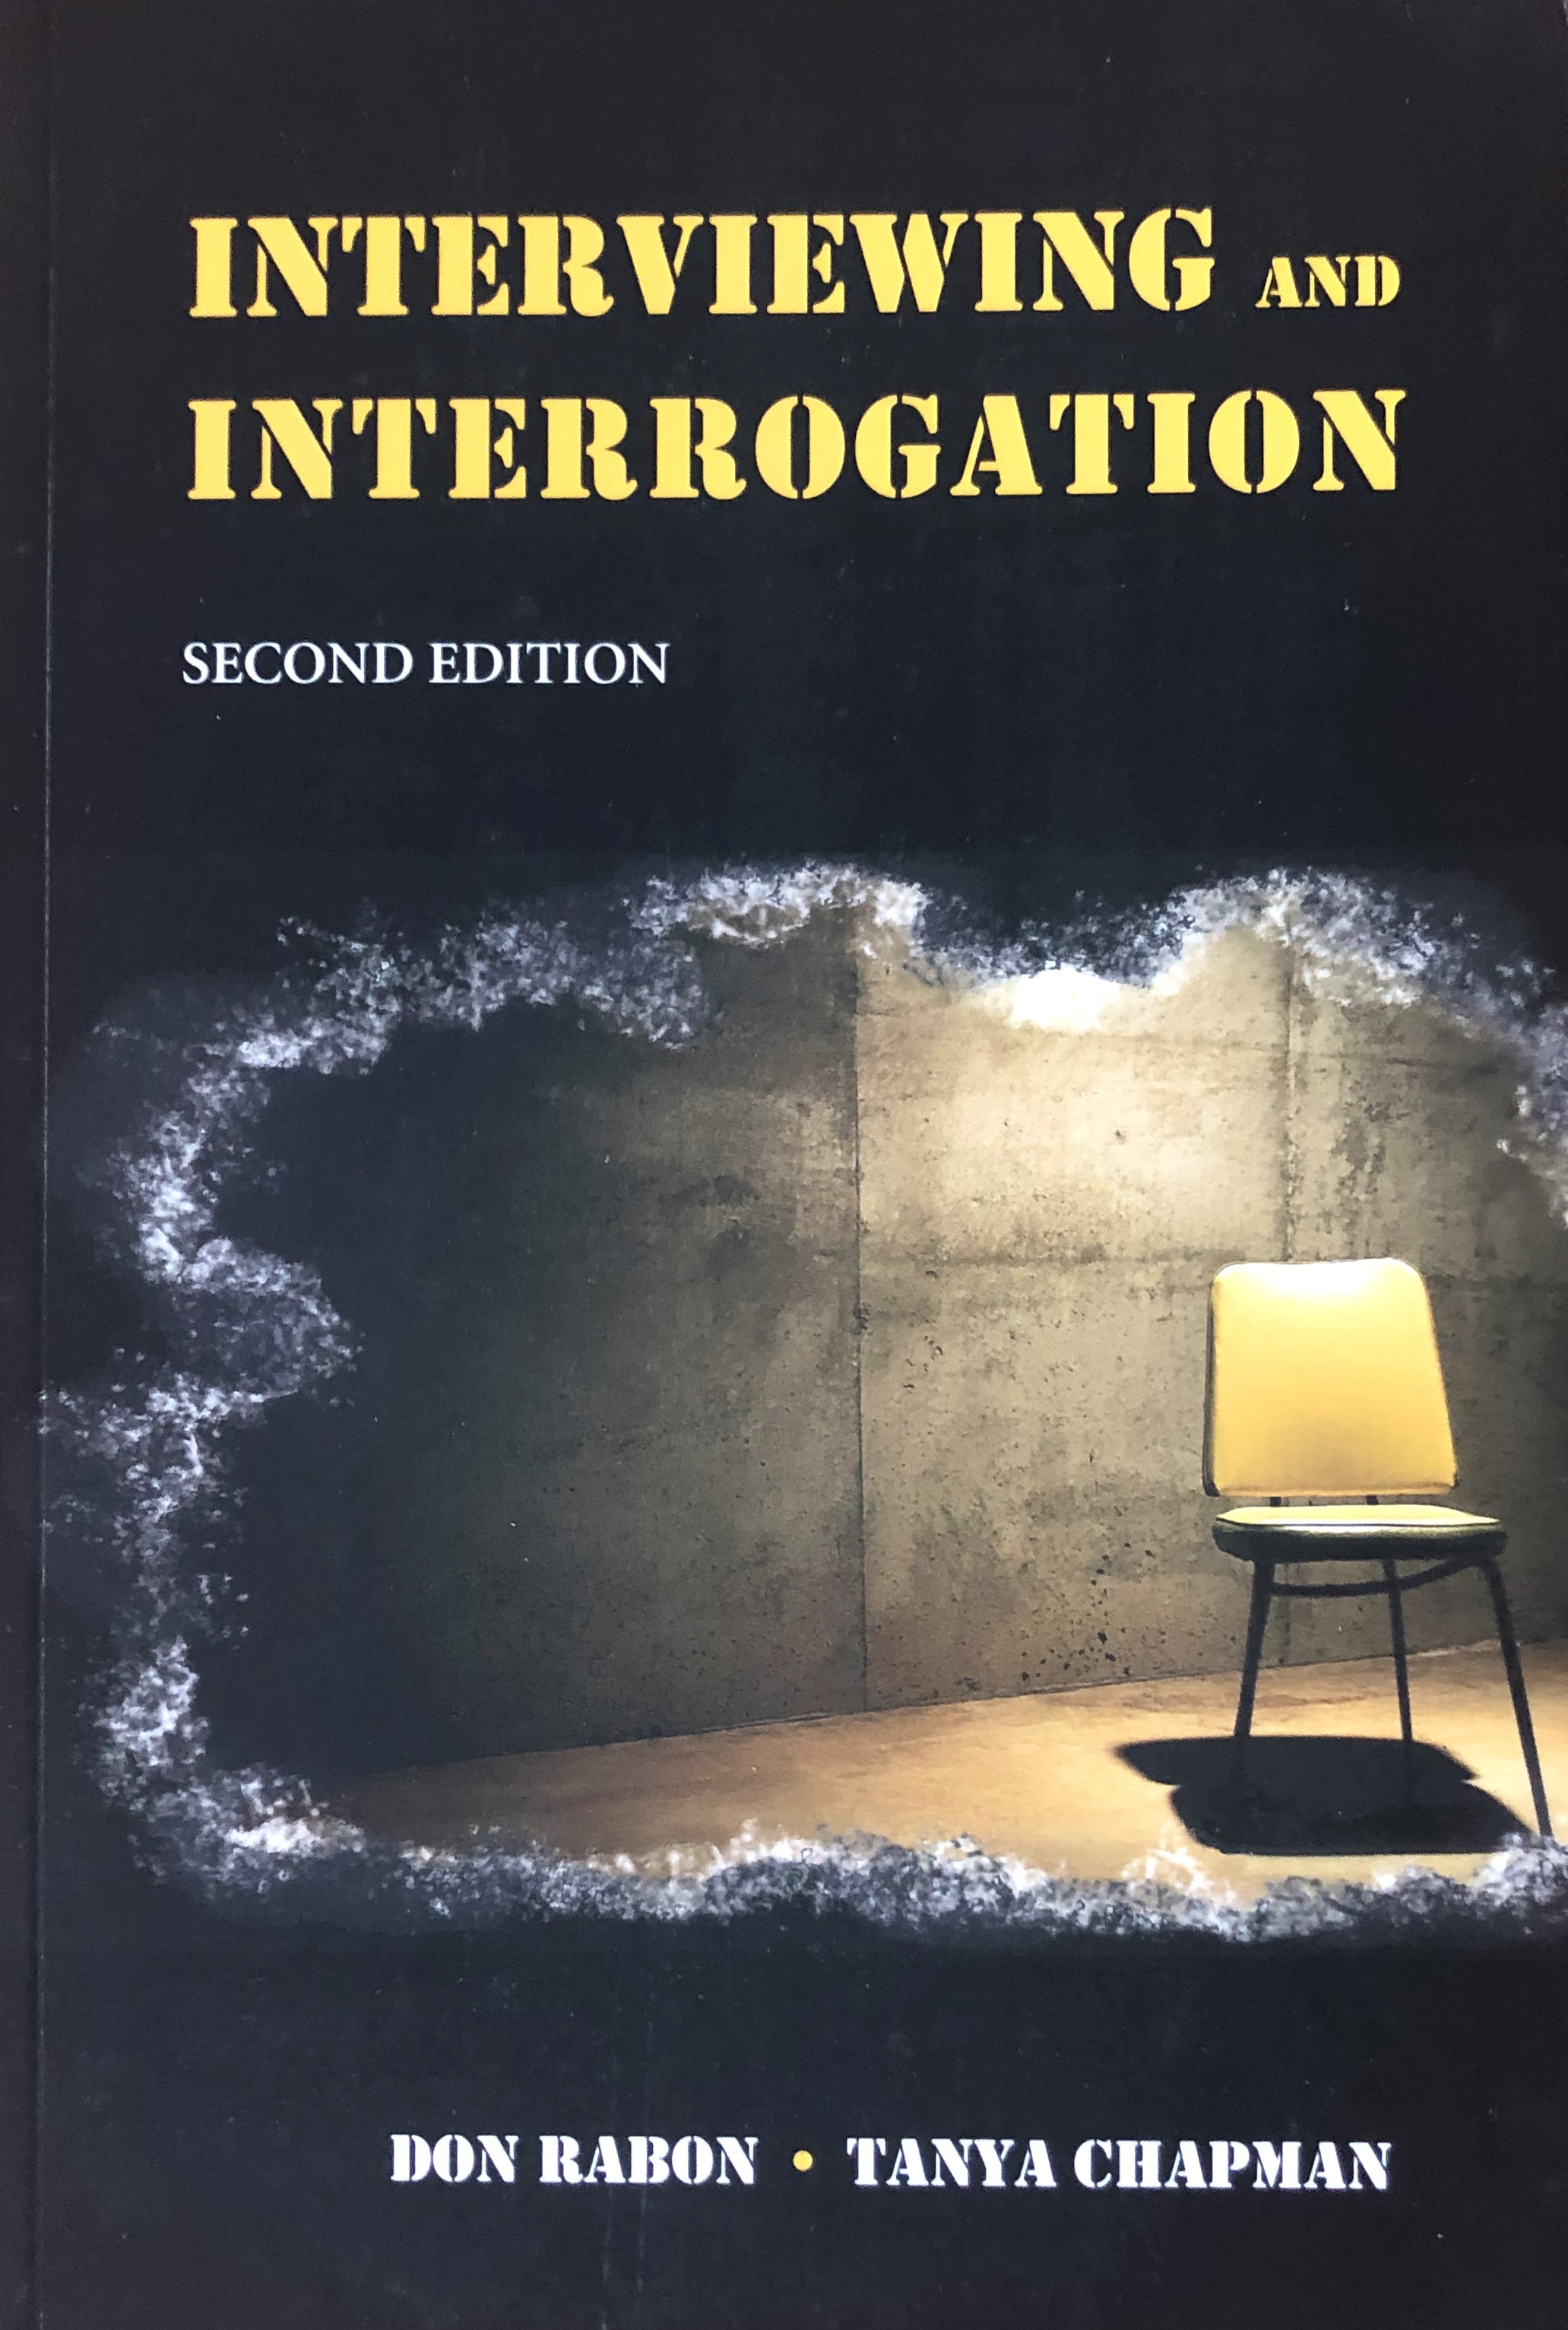 Description Interviewing and Interrogation, 2nd Edition